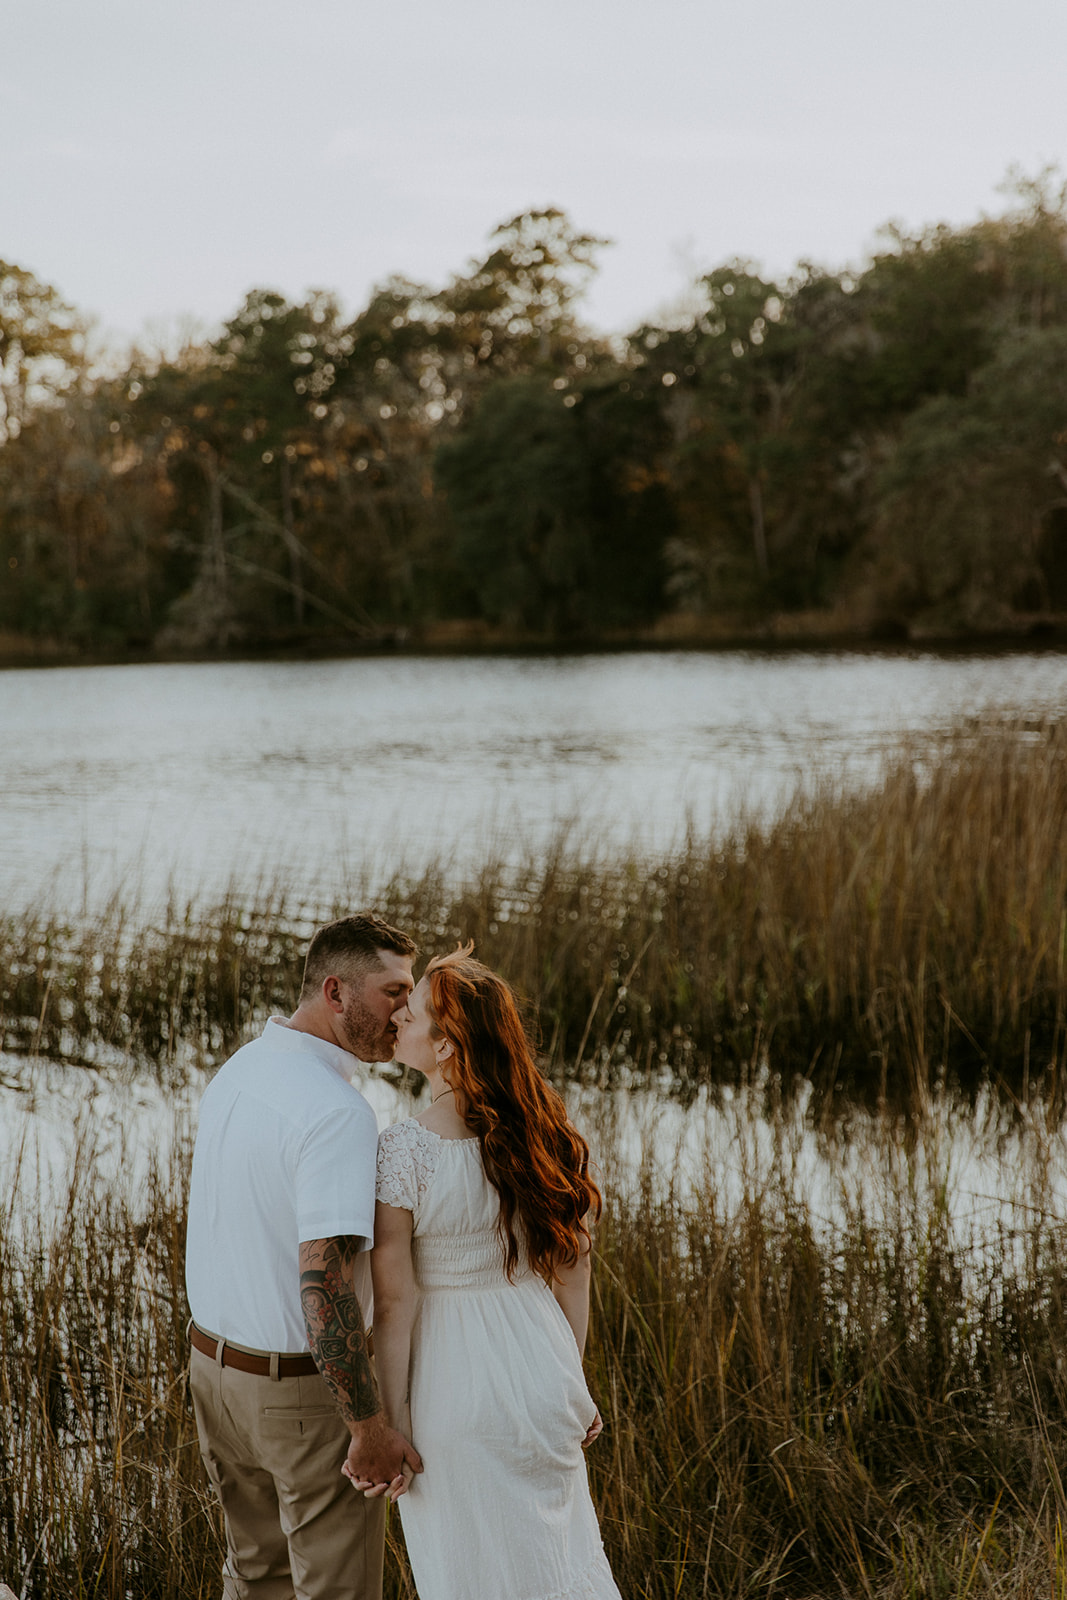 A couple embraces lovingly in a sunlit natural setting, touching foreheads and smiling at each other at their outdoor engagement photos